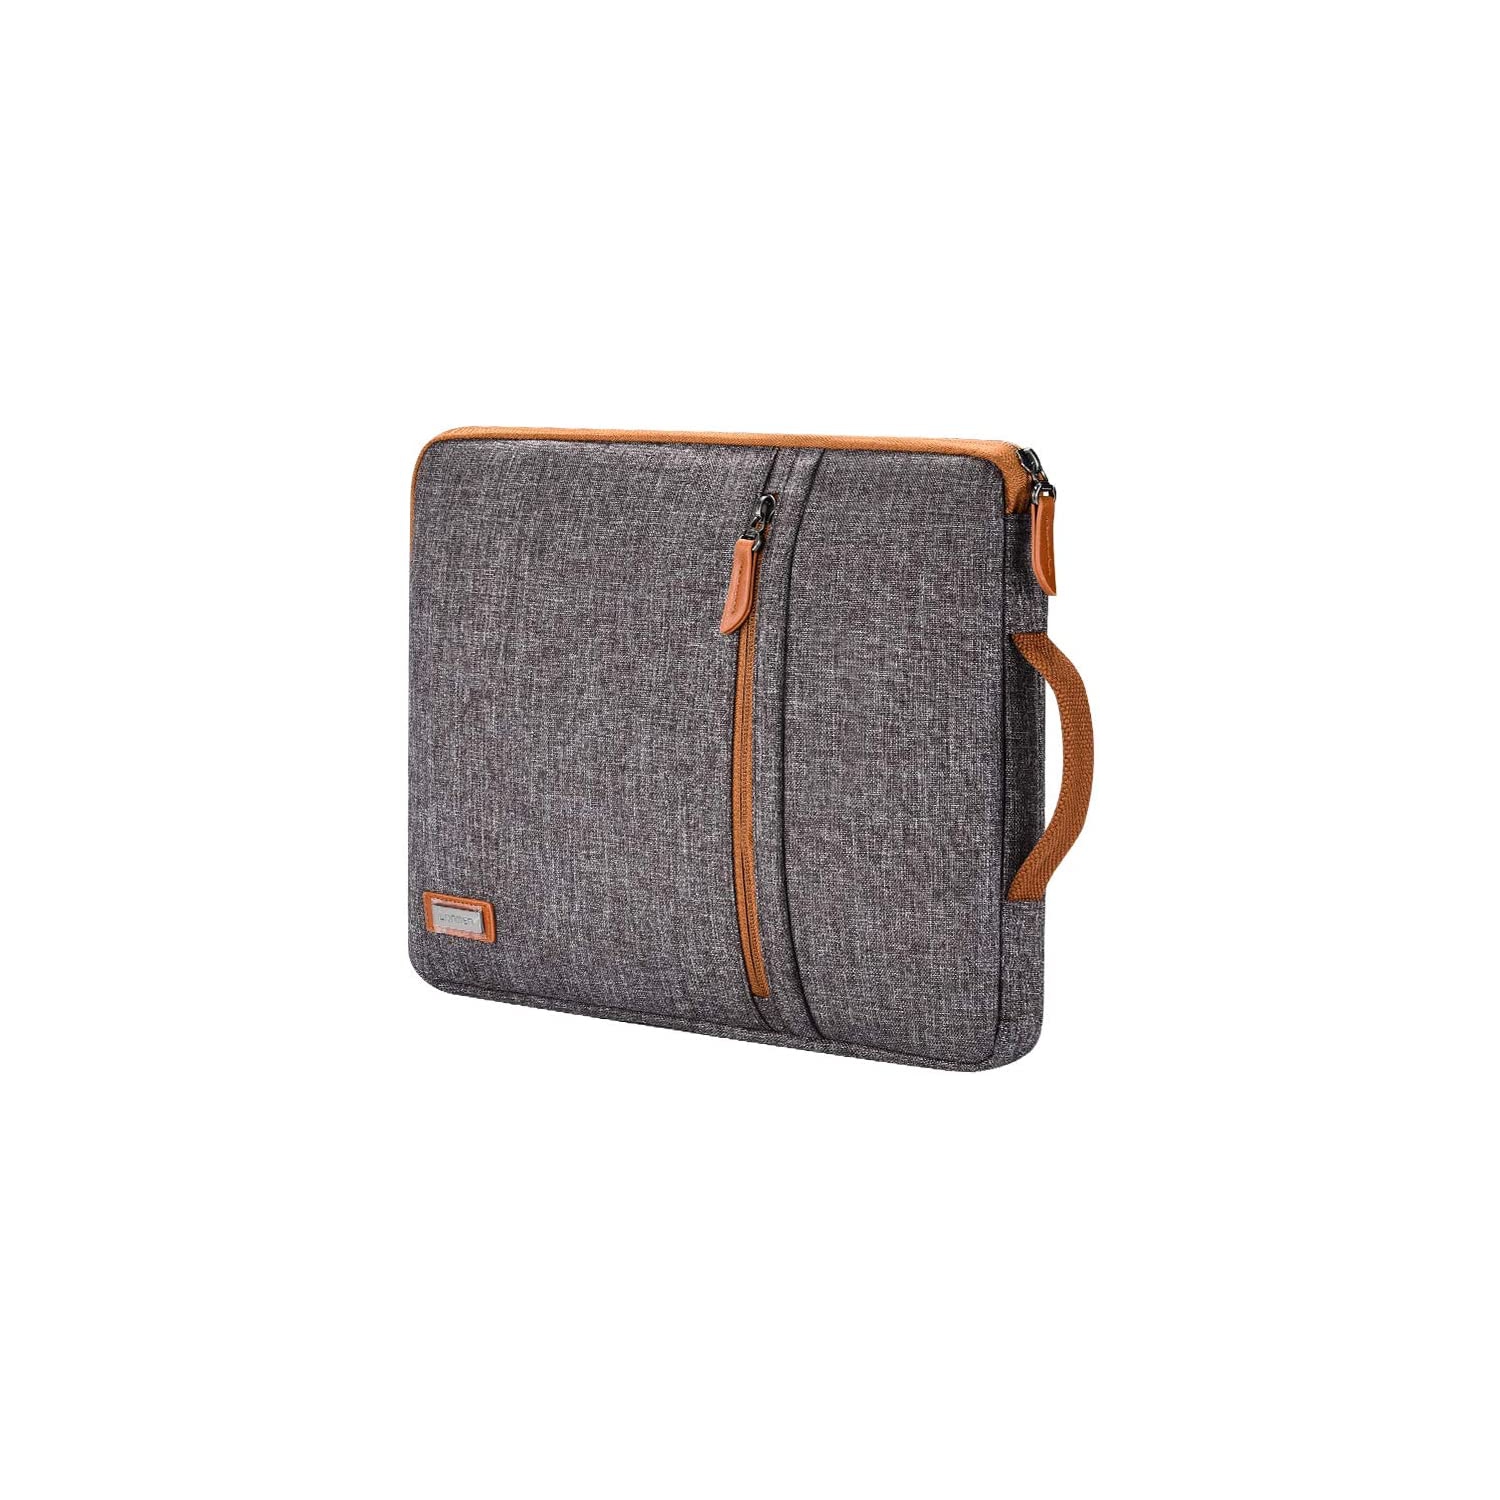 10.1 Inch Laptop Sleeve Case Water-Resistant Tablet Protective Carrying Handle Bag for 10.5" iPad Pro/9.7" iPad